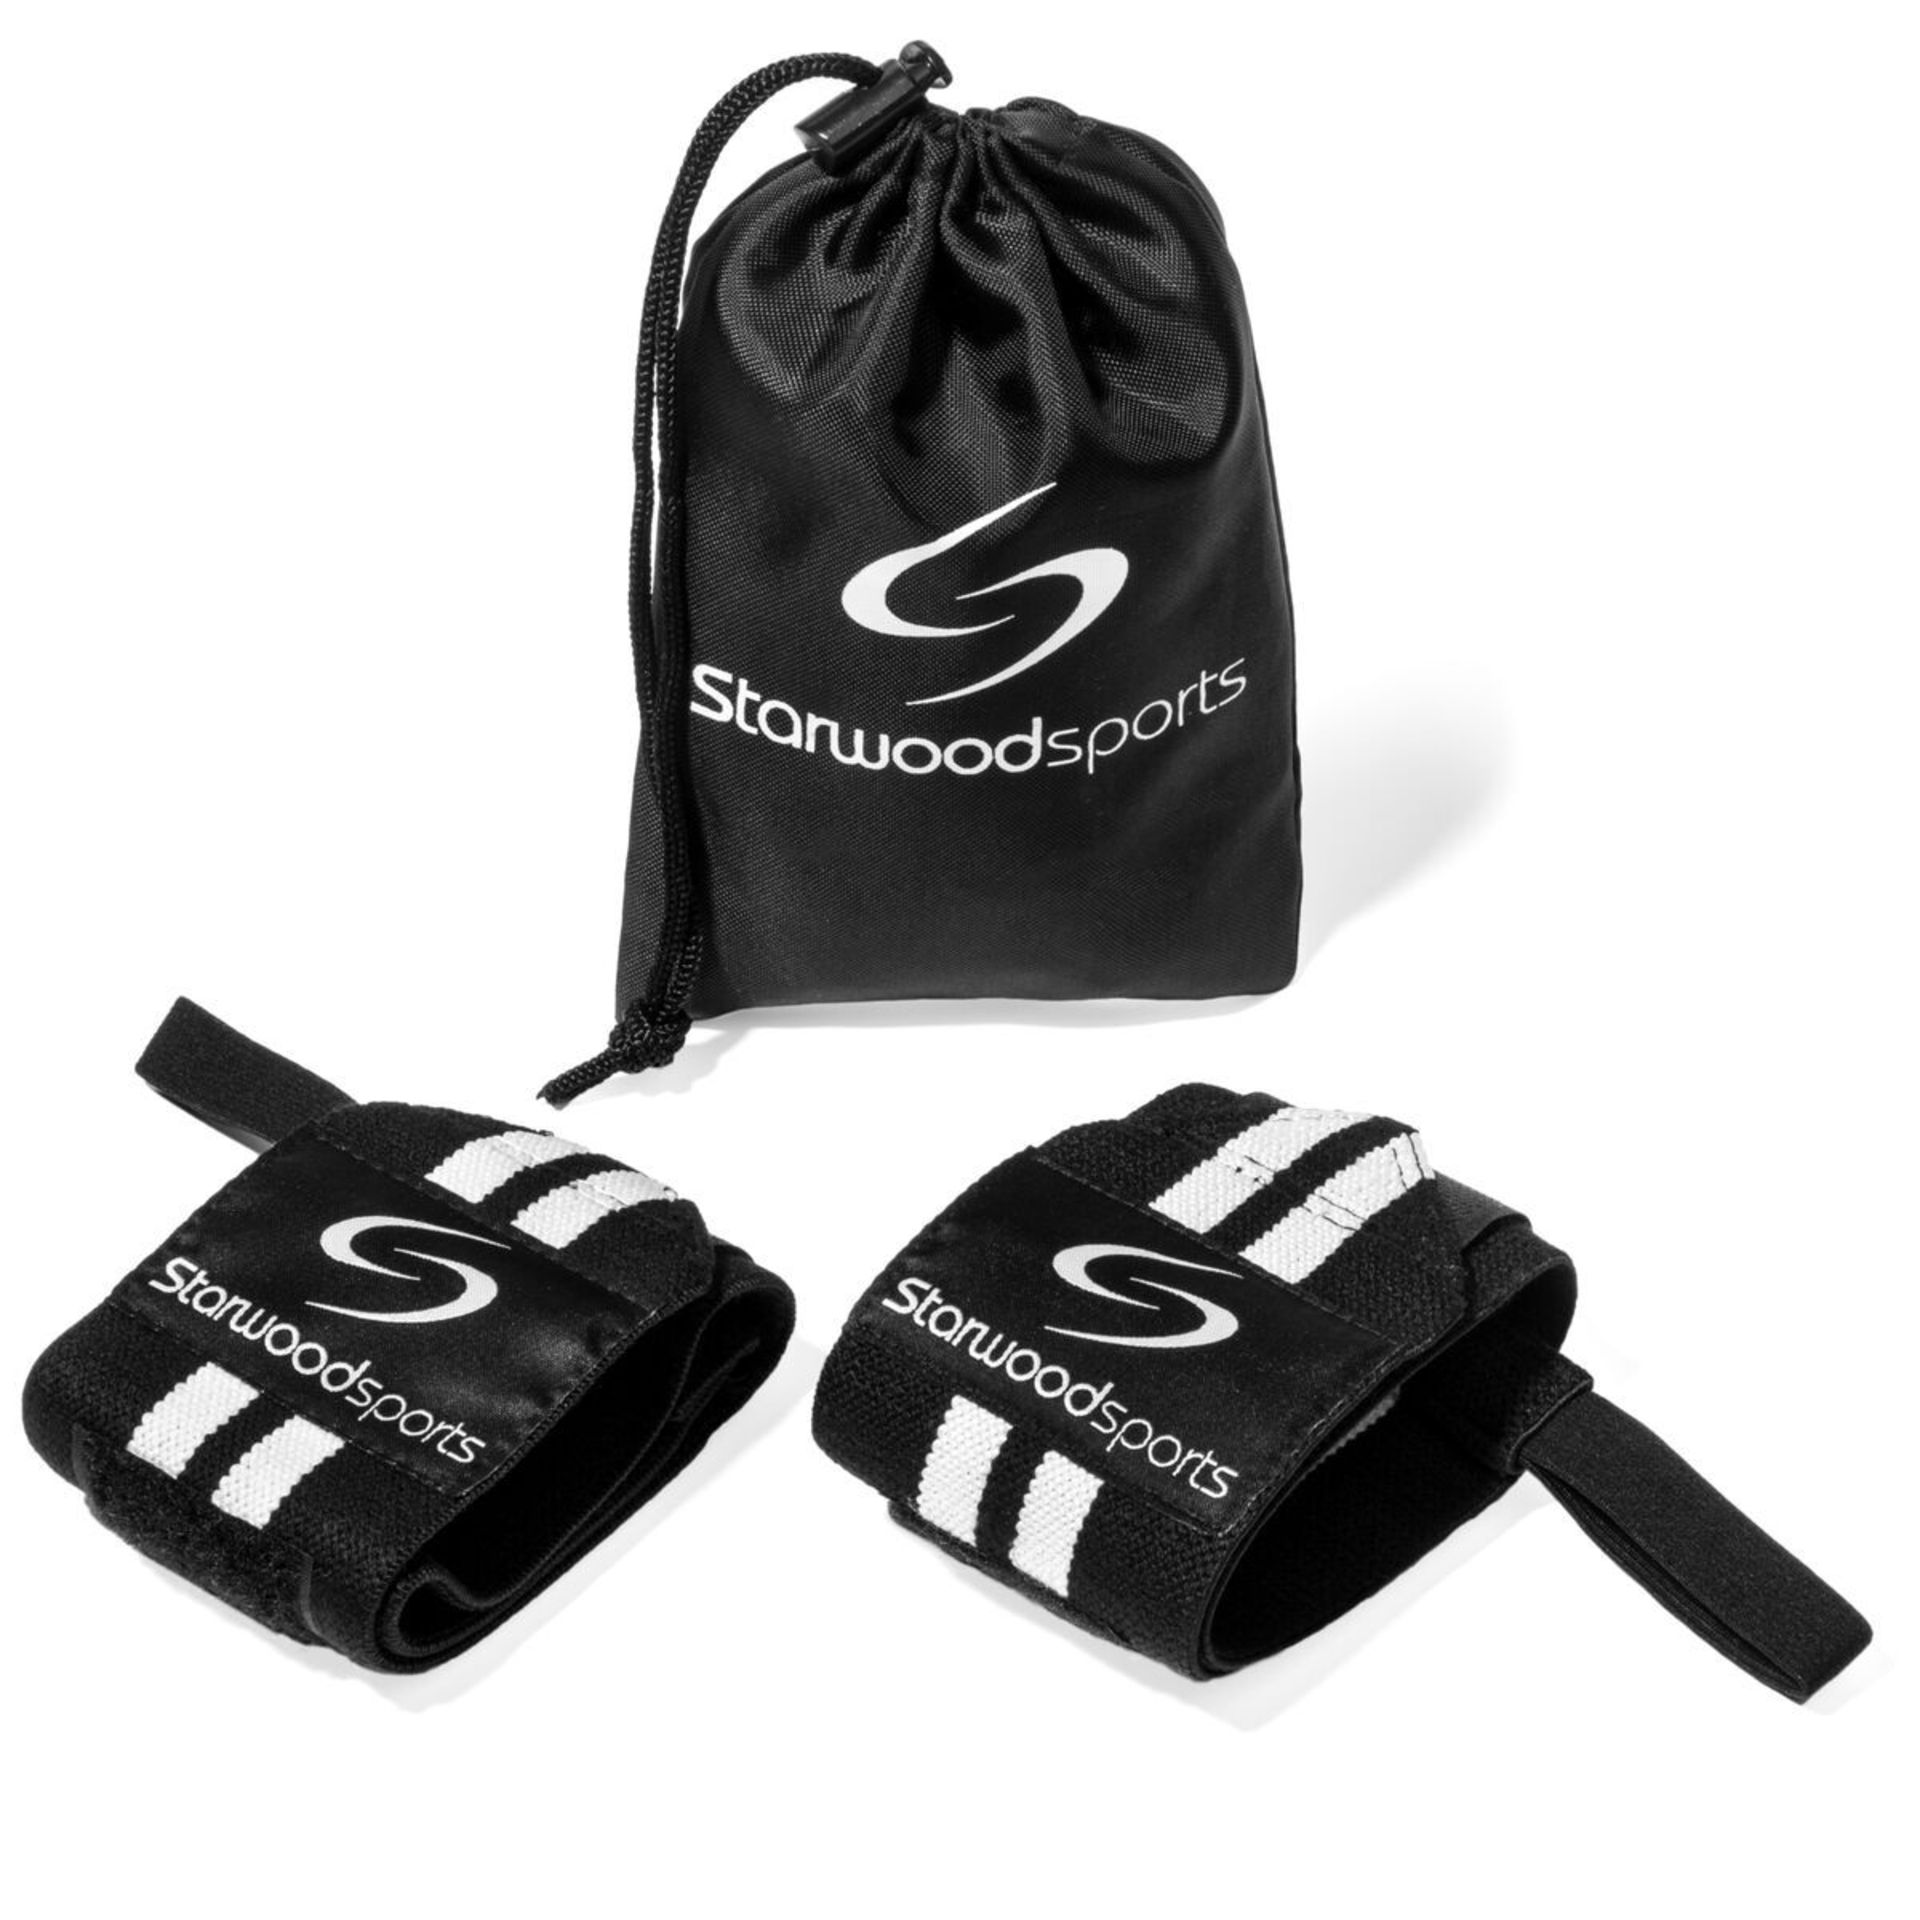 80 X BRAND NEW SHARWOOD SPORTS BRANDED PAIRS OF WRIST STRAPS IN A BAG - (PICK LOOSE) - Image 2 of 2